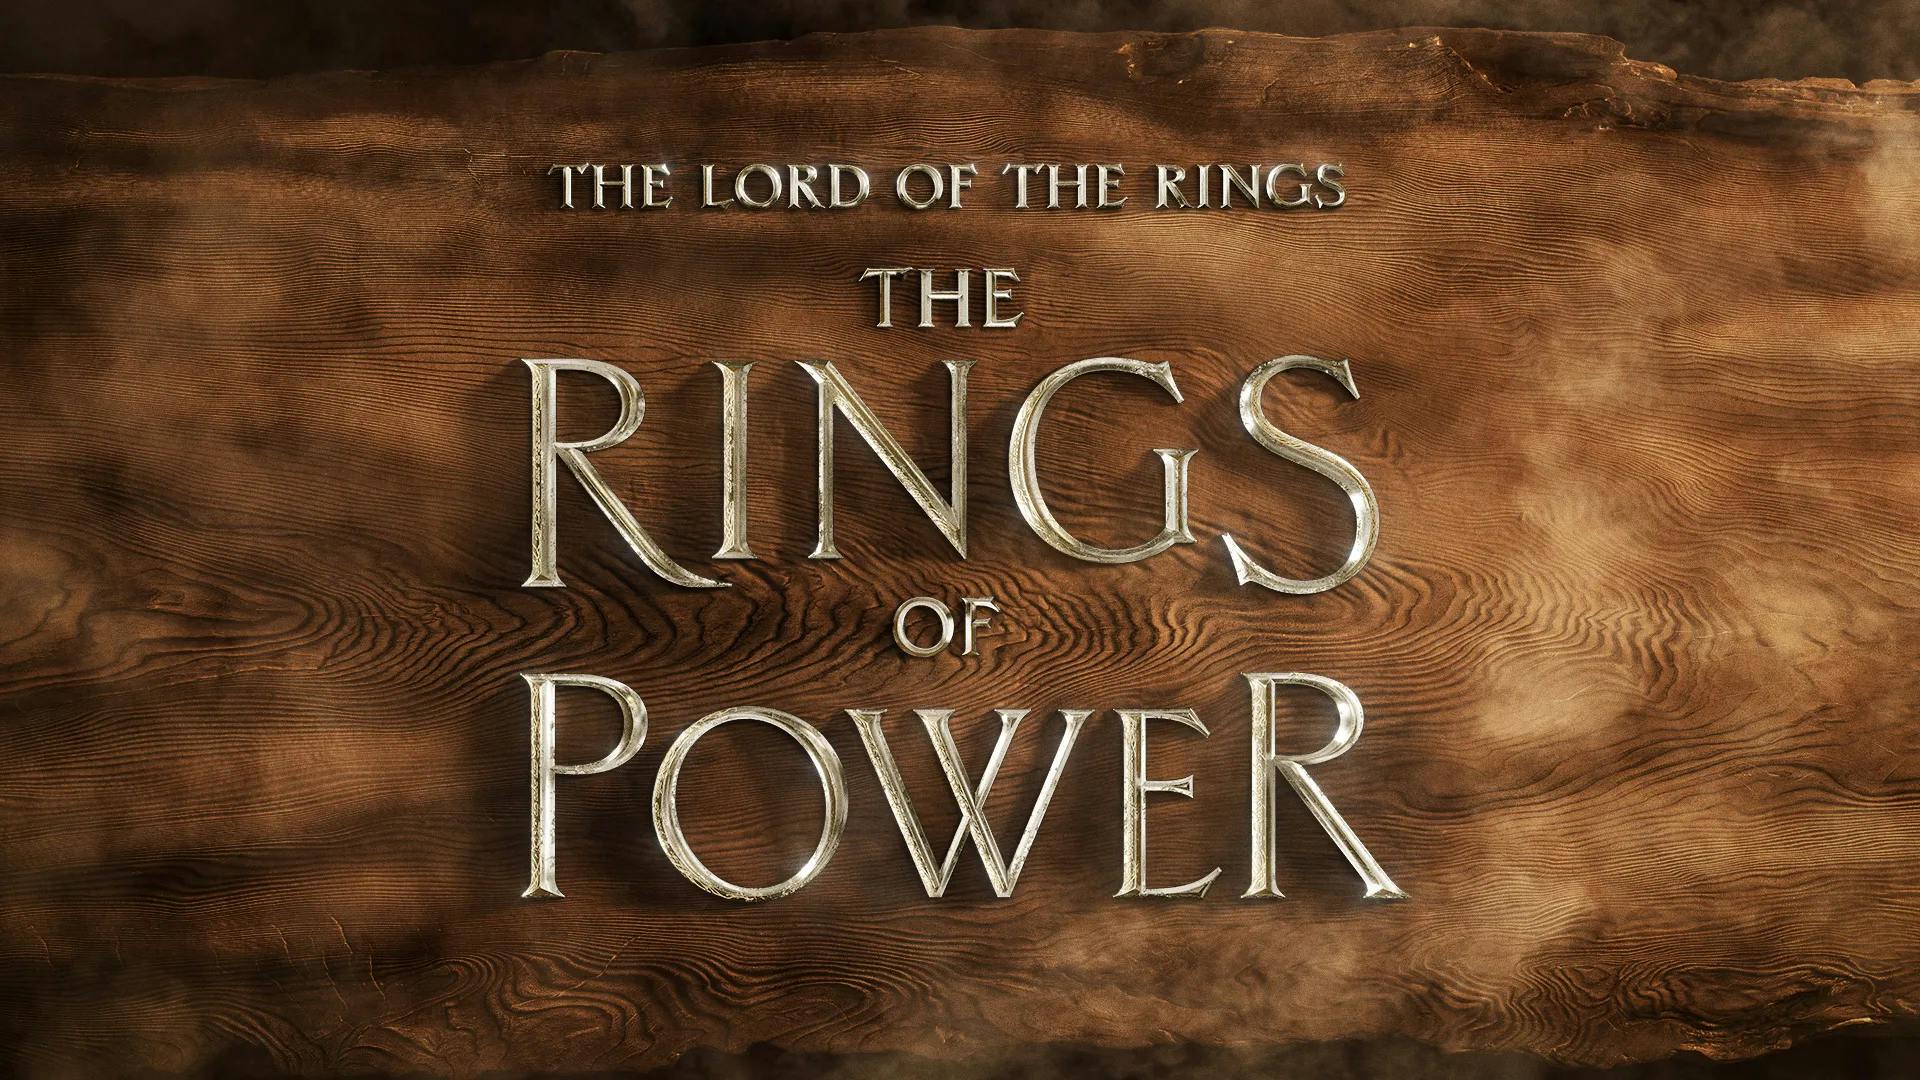 s Lord Of The Rings Series: Everything We Know So Far